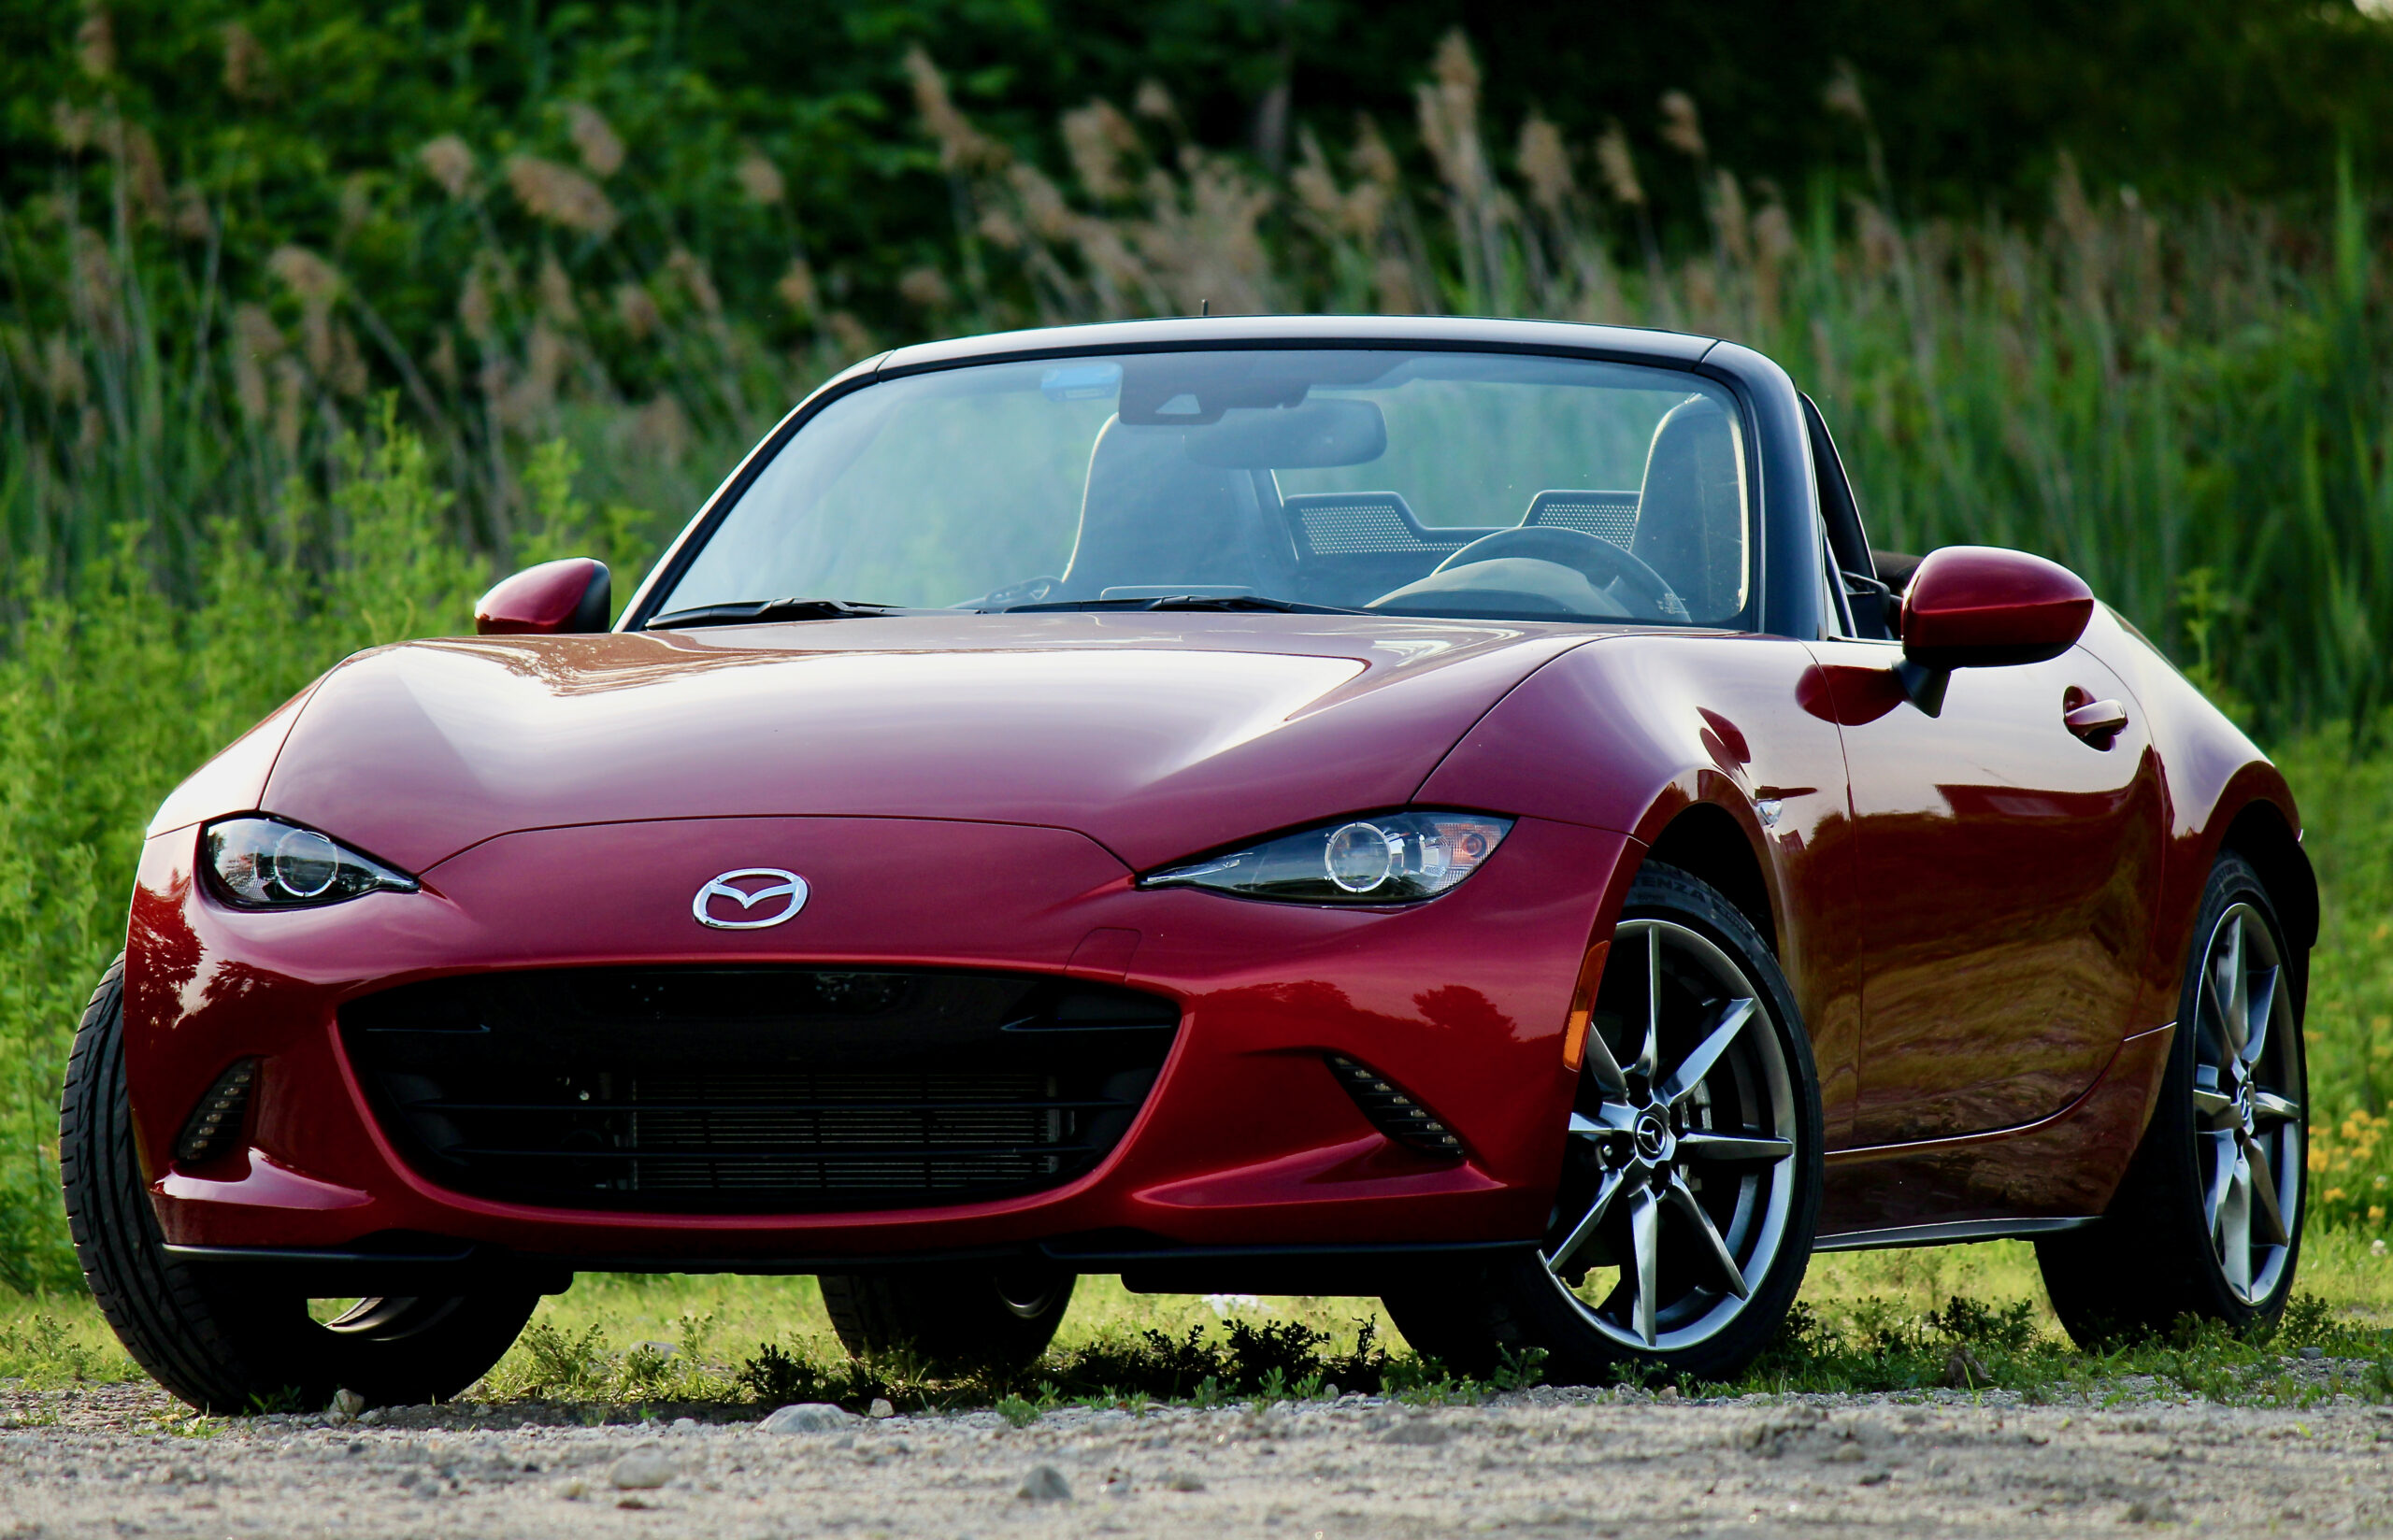 The 2022 Mazda MX-5 Miata is more than the sum of its parts